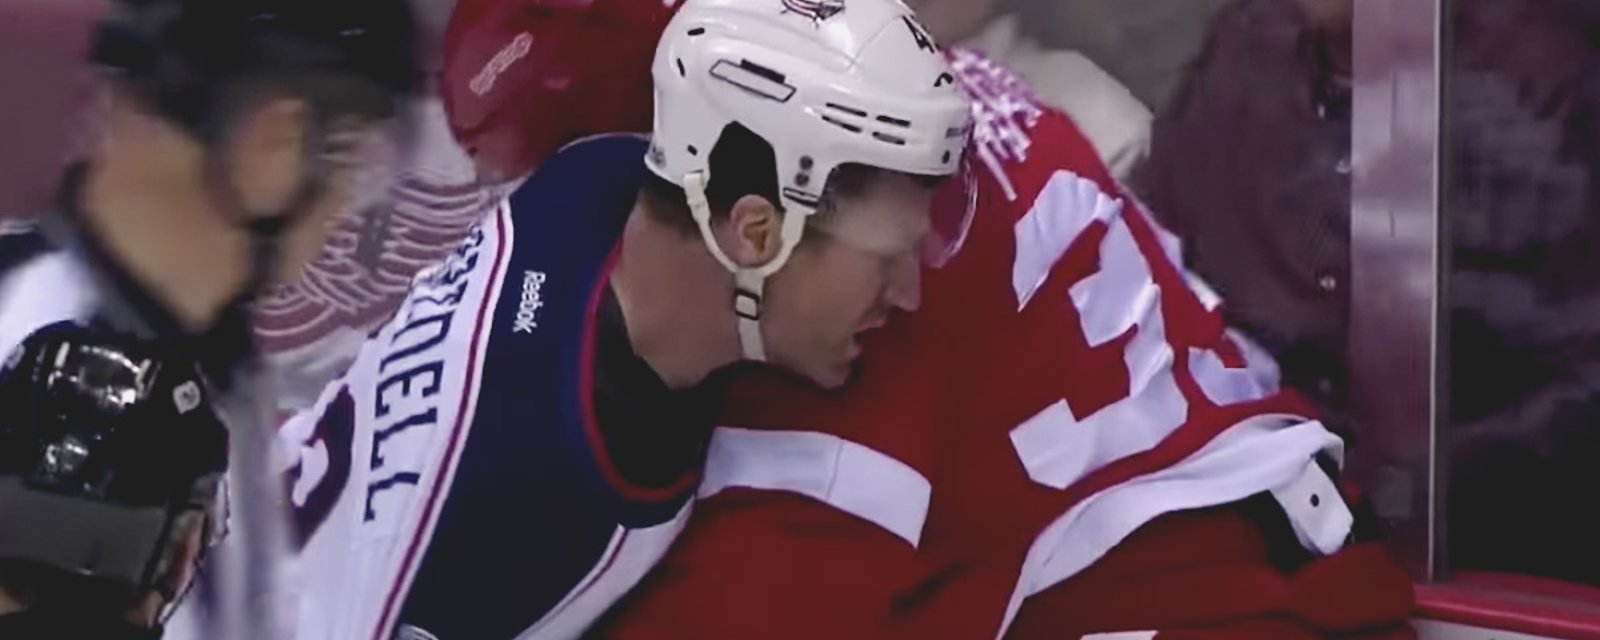 Must see : Former first rounder dropped veteran Scott Hartnell